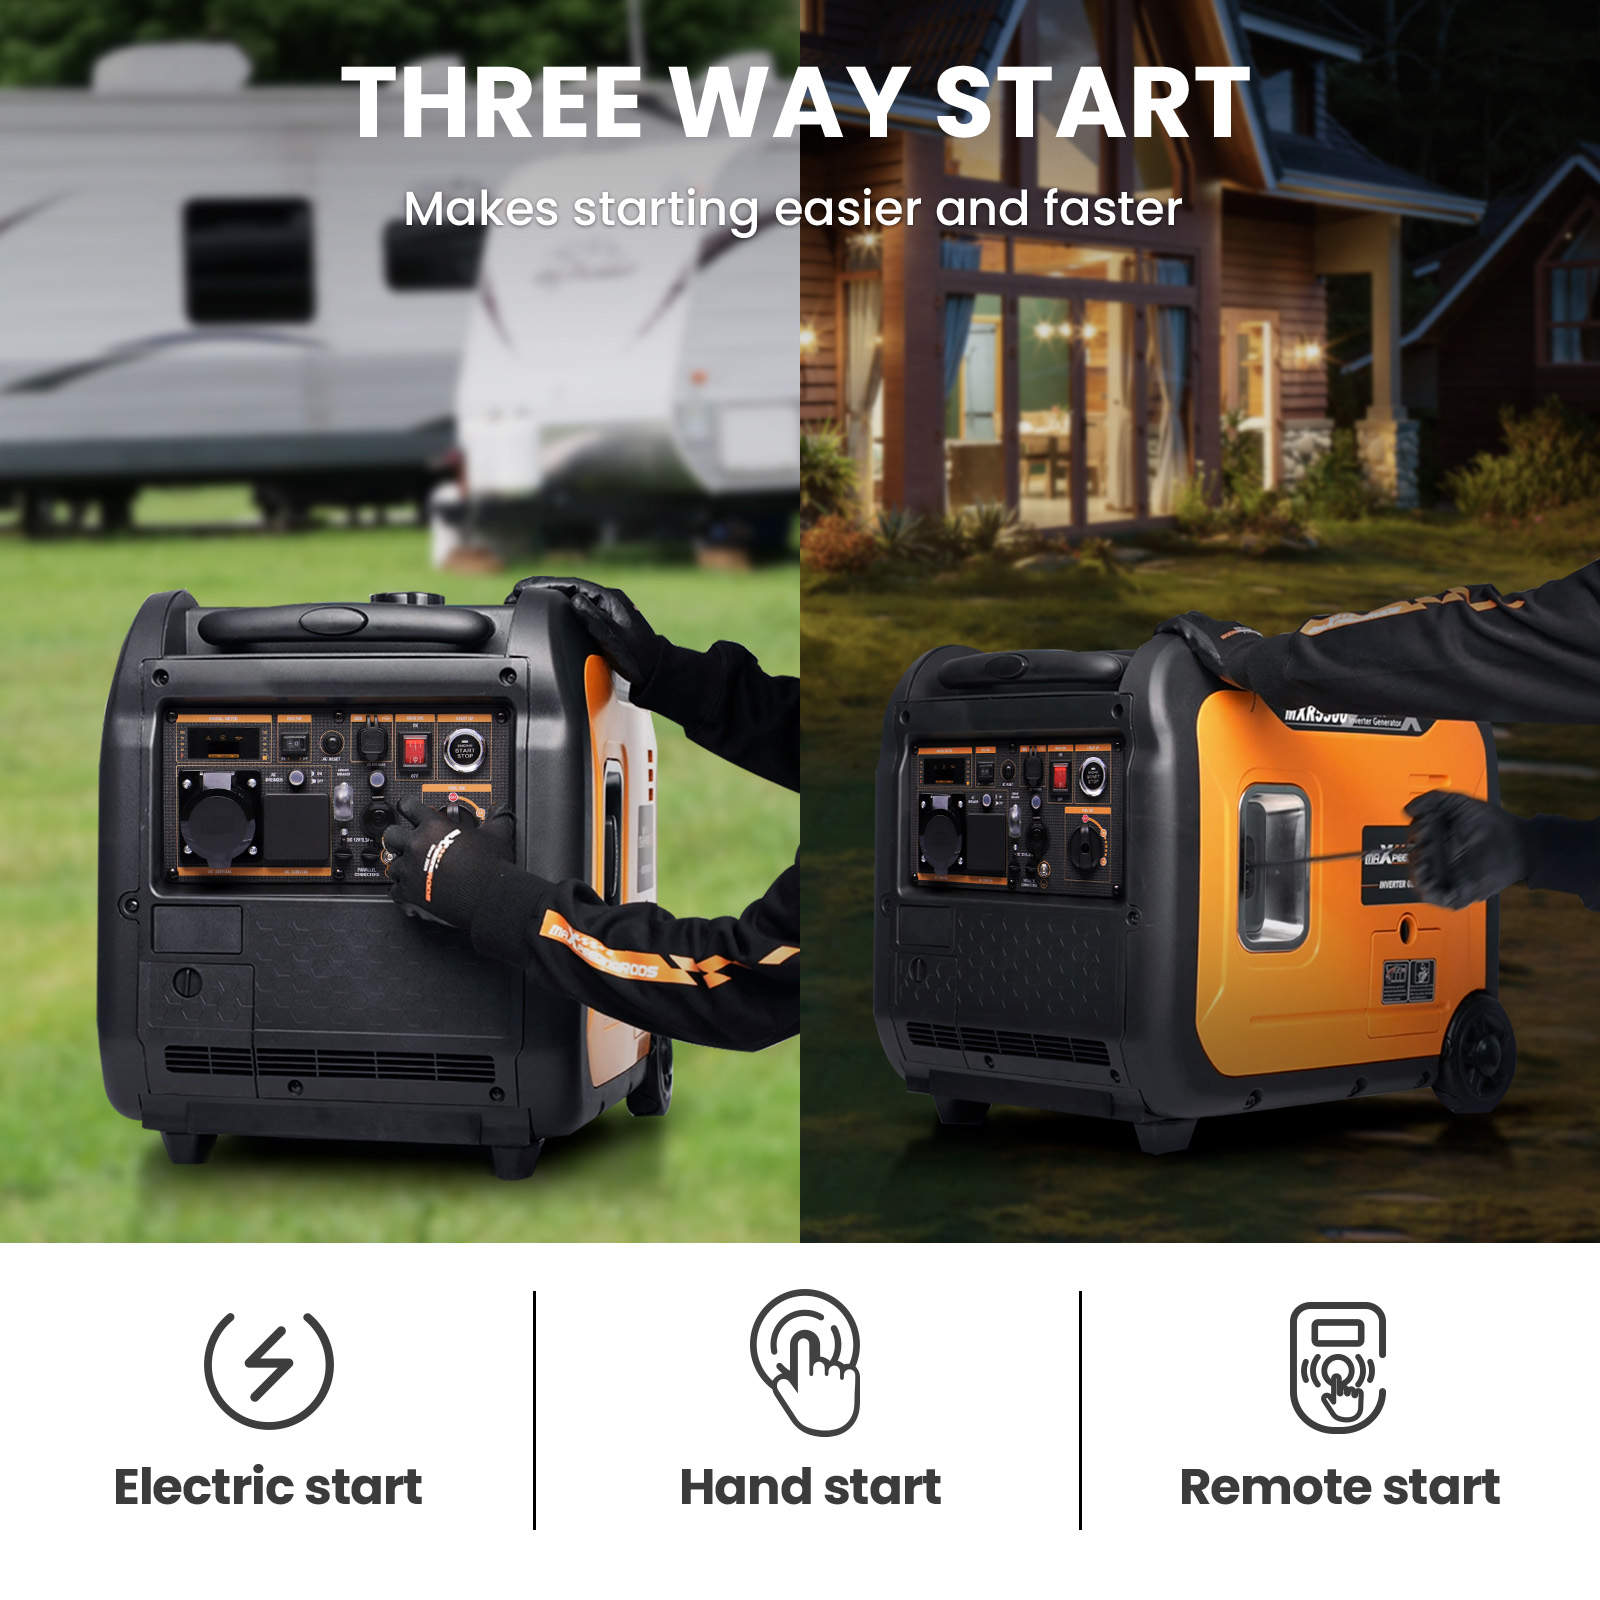 Buy Inverter Generator Portable 5.5kw 5kw For Camping RV Travel Jobsite Use  and other parts on Maxpeedingrods